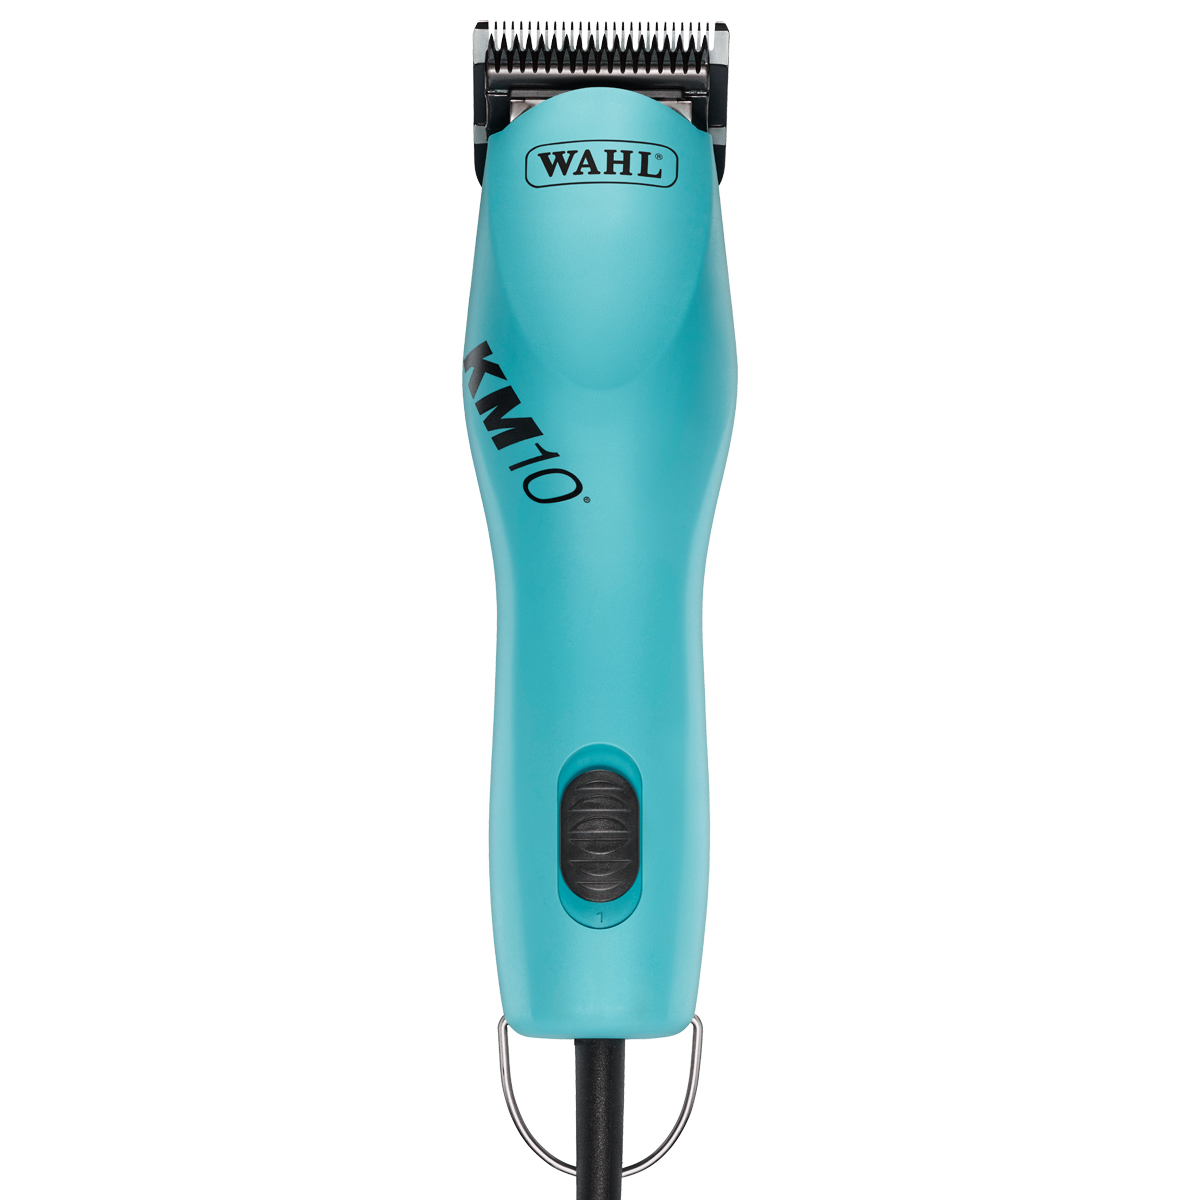 Wahl KM10 Dog Clipper with attachment comb set